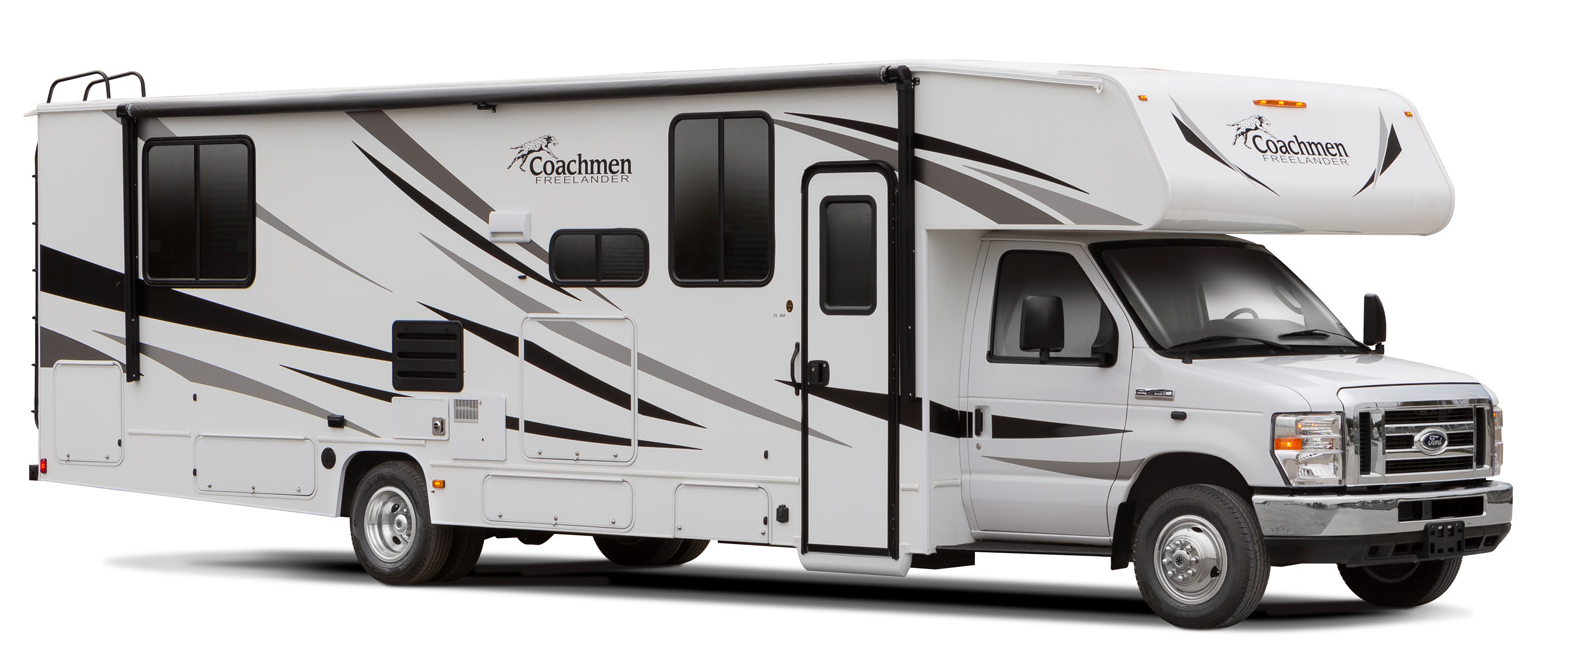 Best Class C Rvs Under 30 Feet, Small Class C Rv With King Size Bed